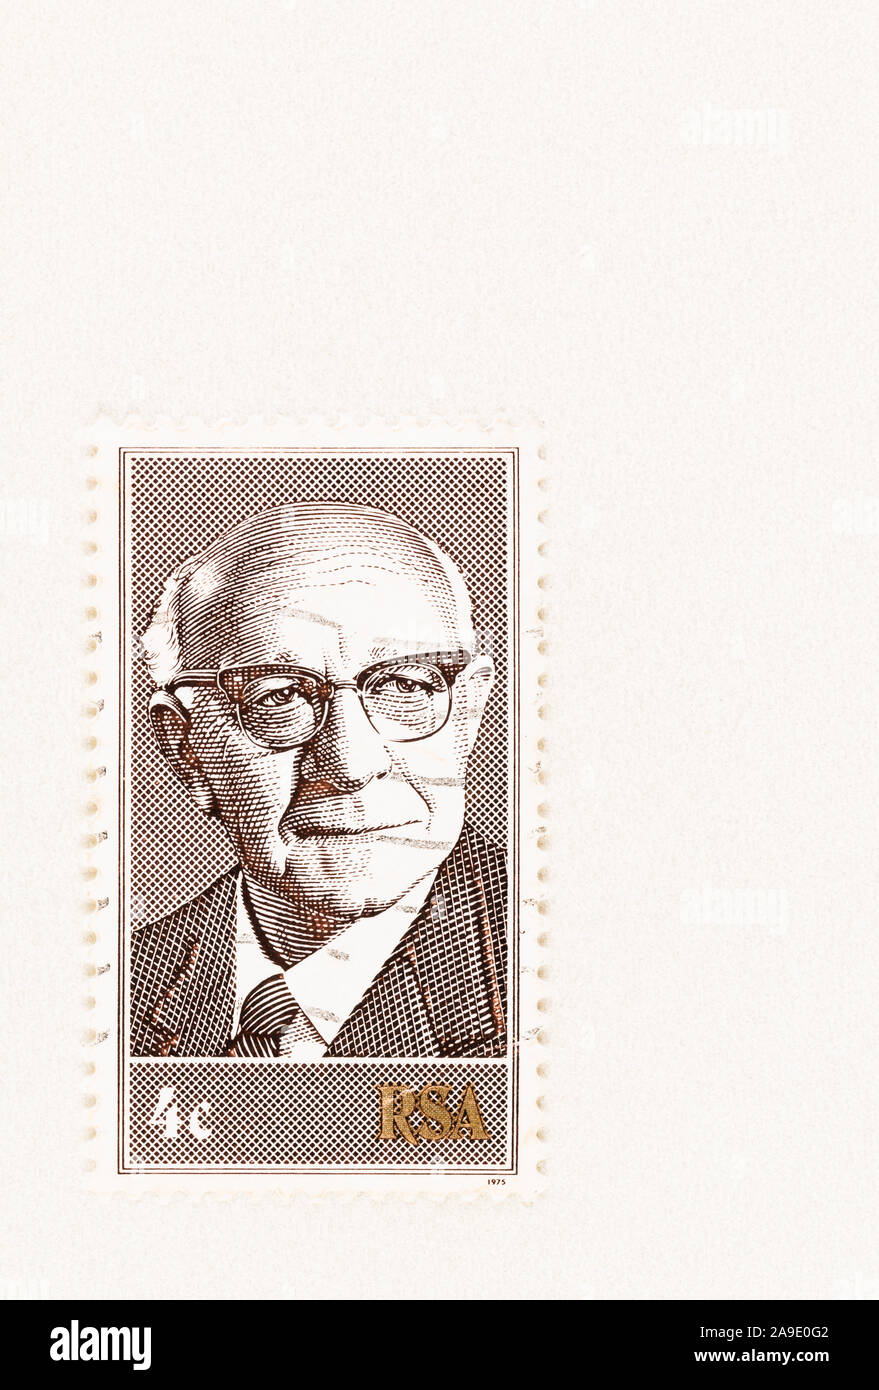 SEATTLE WASHINGTON - October 5, 2019: Postage stamp with Nicolaas  Diederichs, the third state president of South Africa. Scott # 440 issued in 1975. Stock Photo